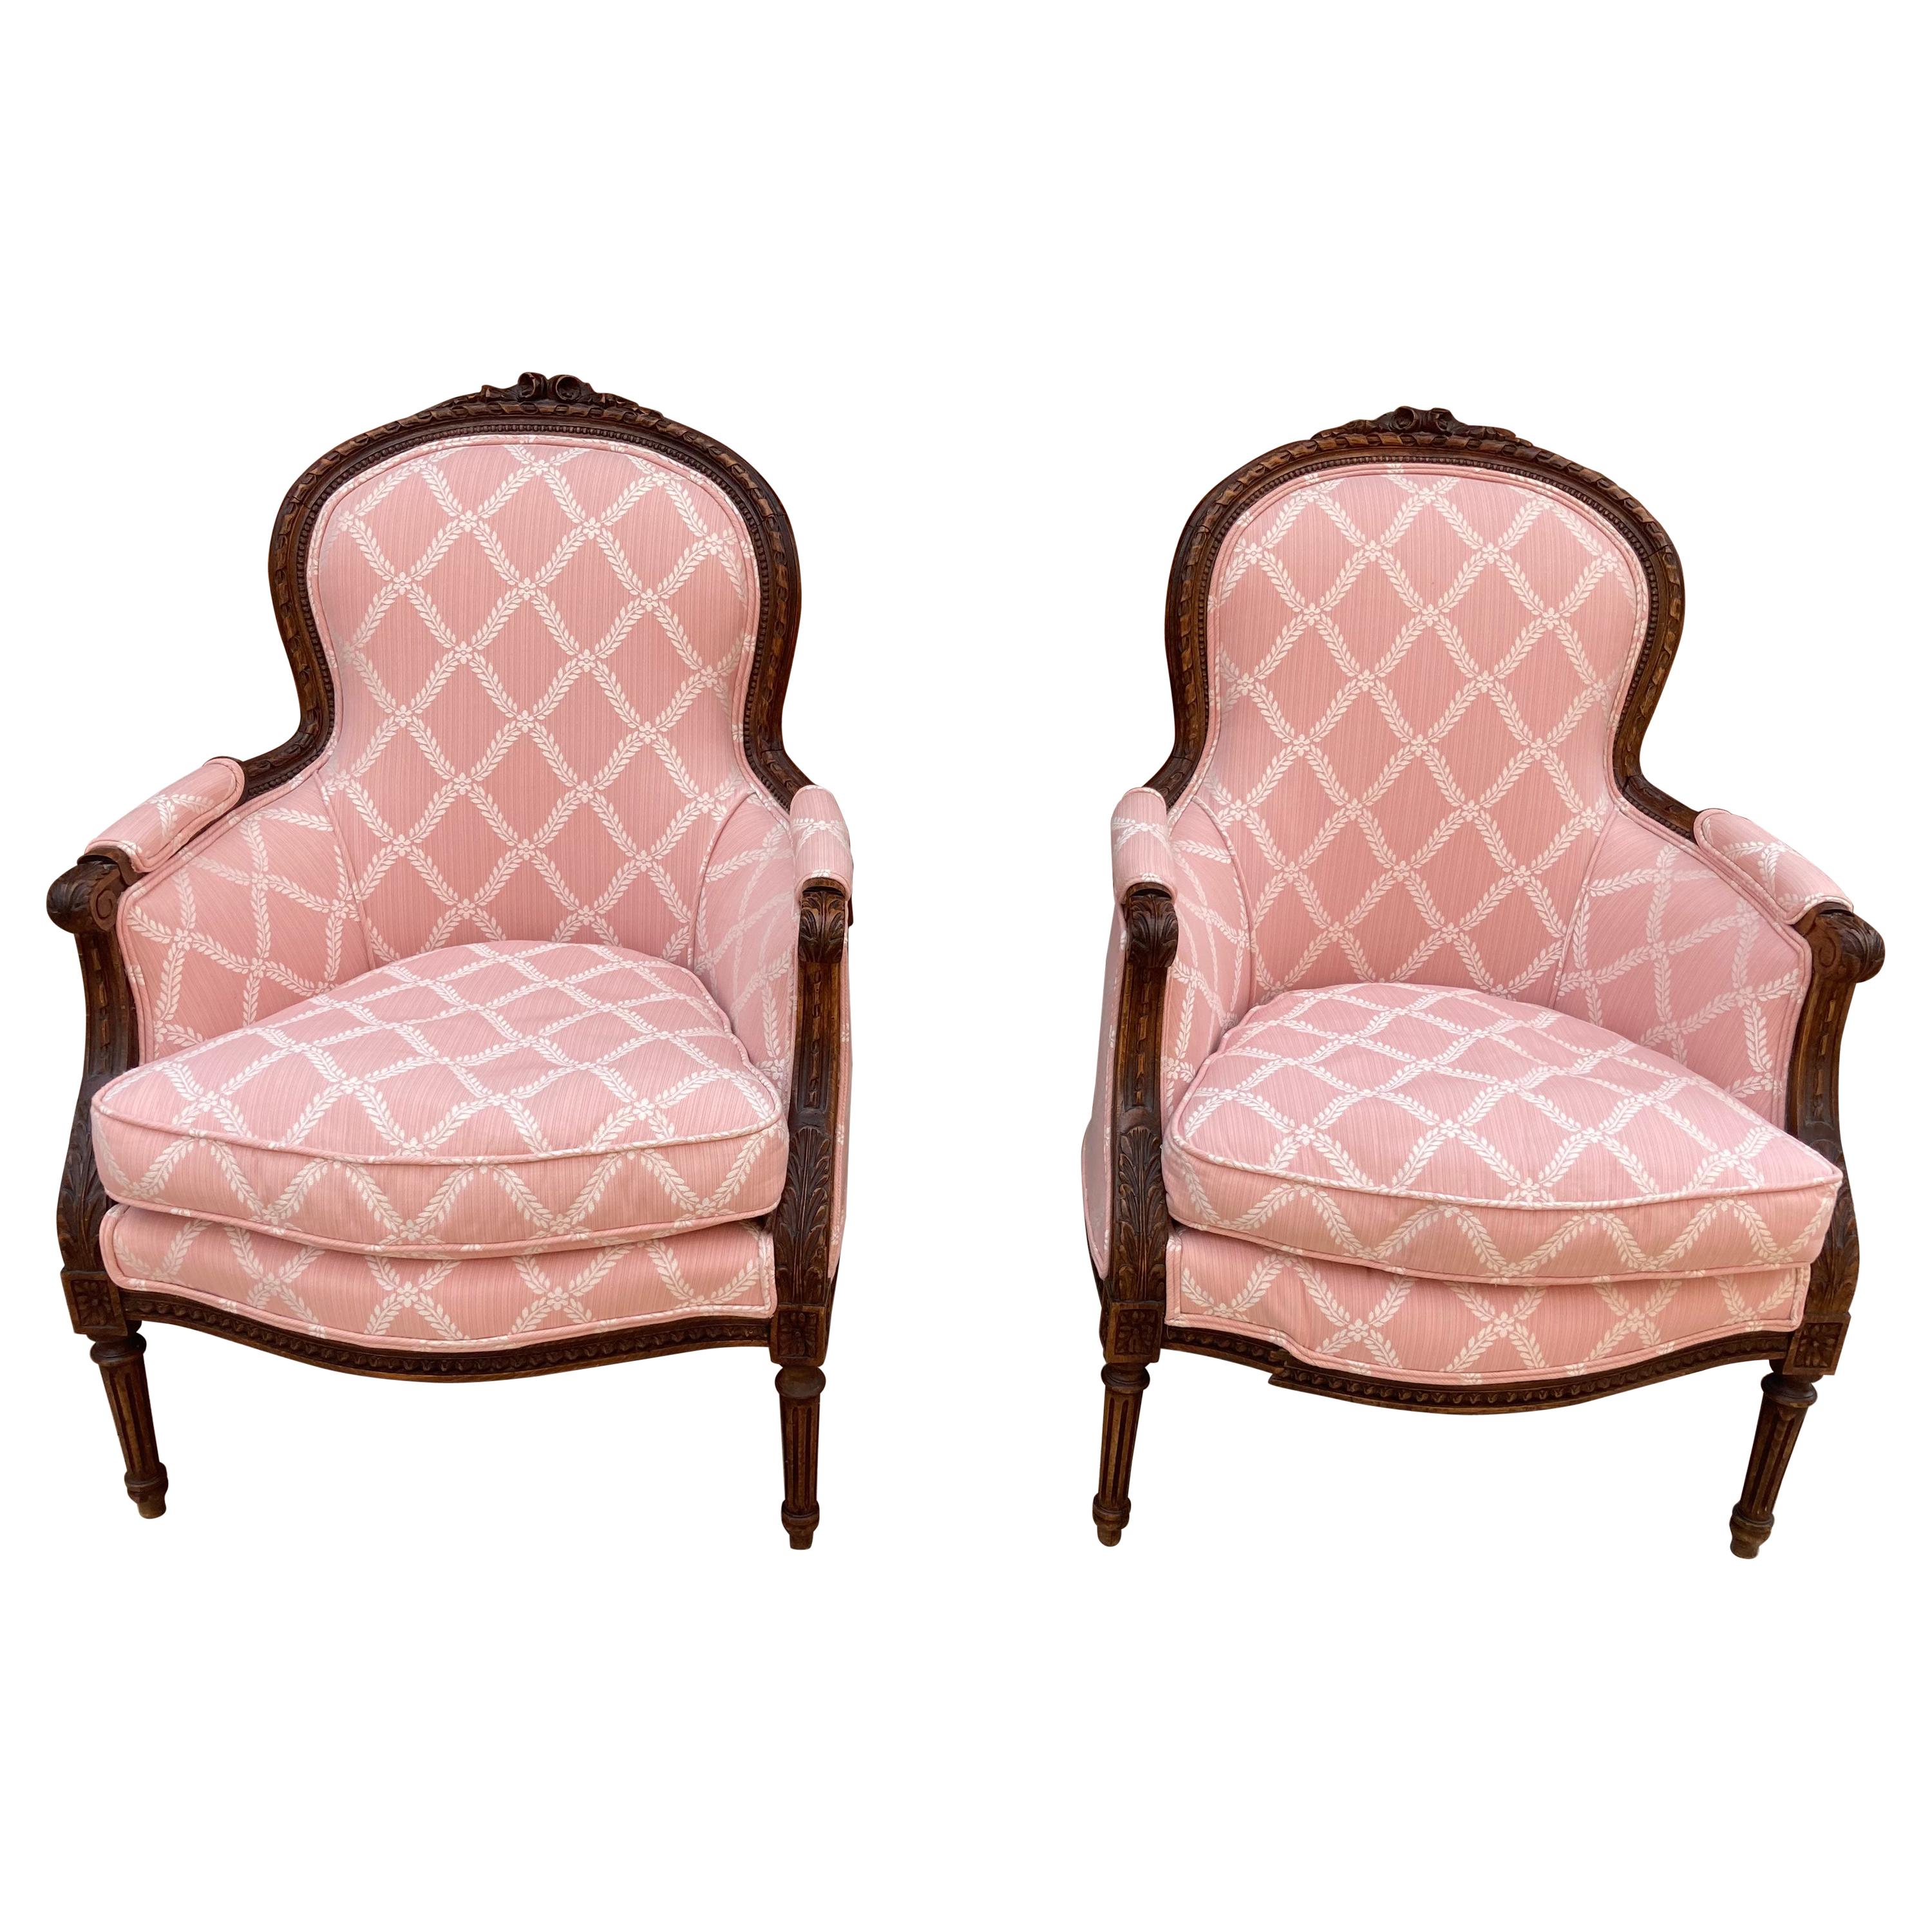 Elegant Pair of Rosey Pink French Style Bergere Chairs with Walnut Frames